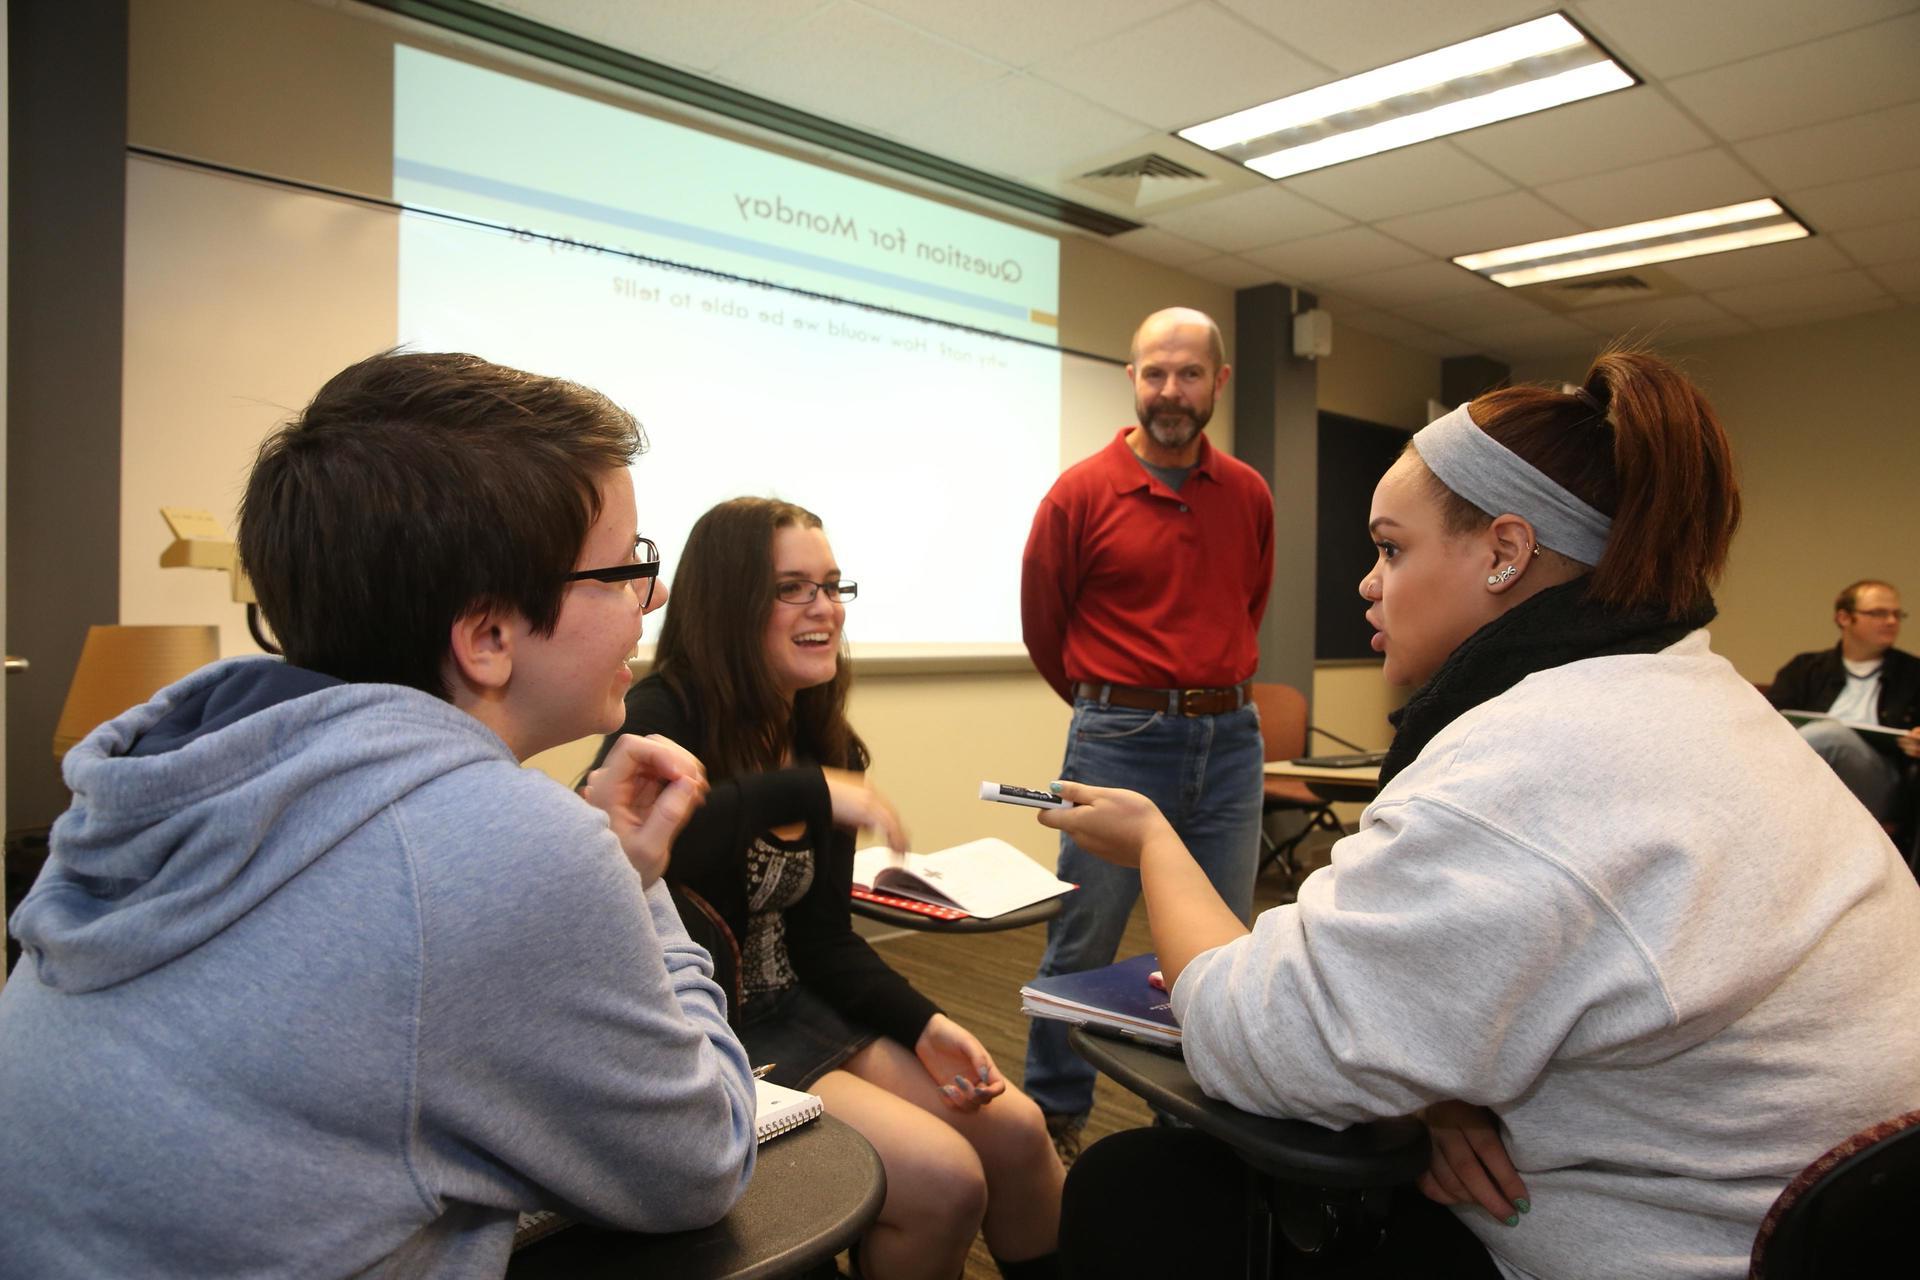 philosophy professor with students in classroom